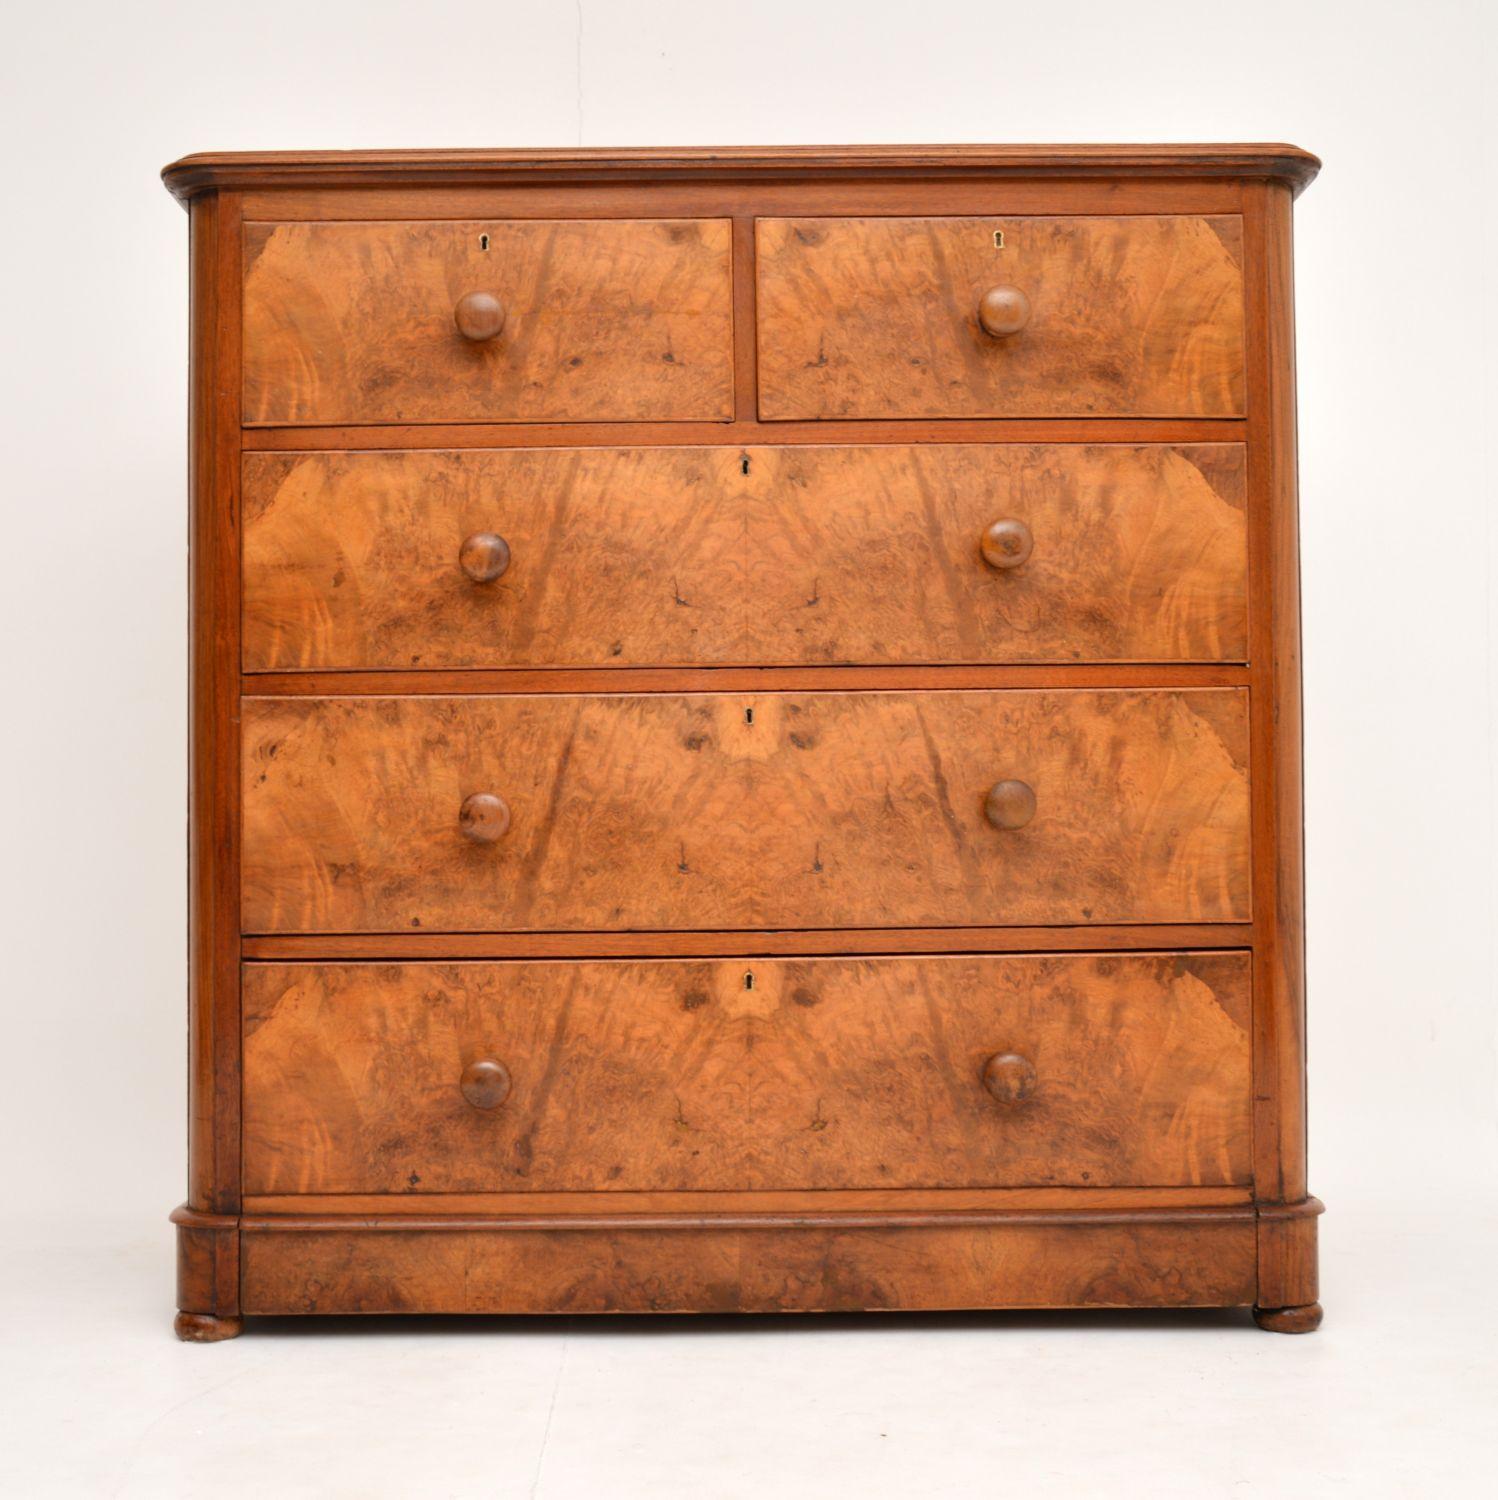 Large antique Victorian burr walnut chest of drawers of extremely fine quality, with a beautiful color, dating to circa 1860s period.

It has a solid walnut top, rounded corners and very deep drawers. The bottom drawer is extra deep, as it is